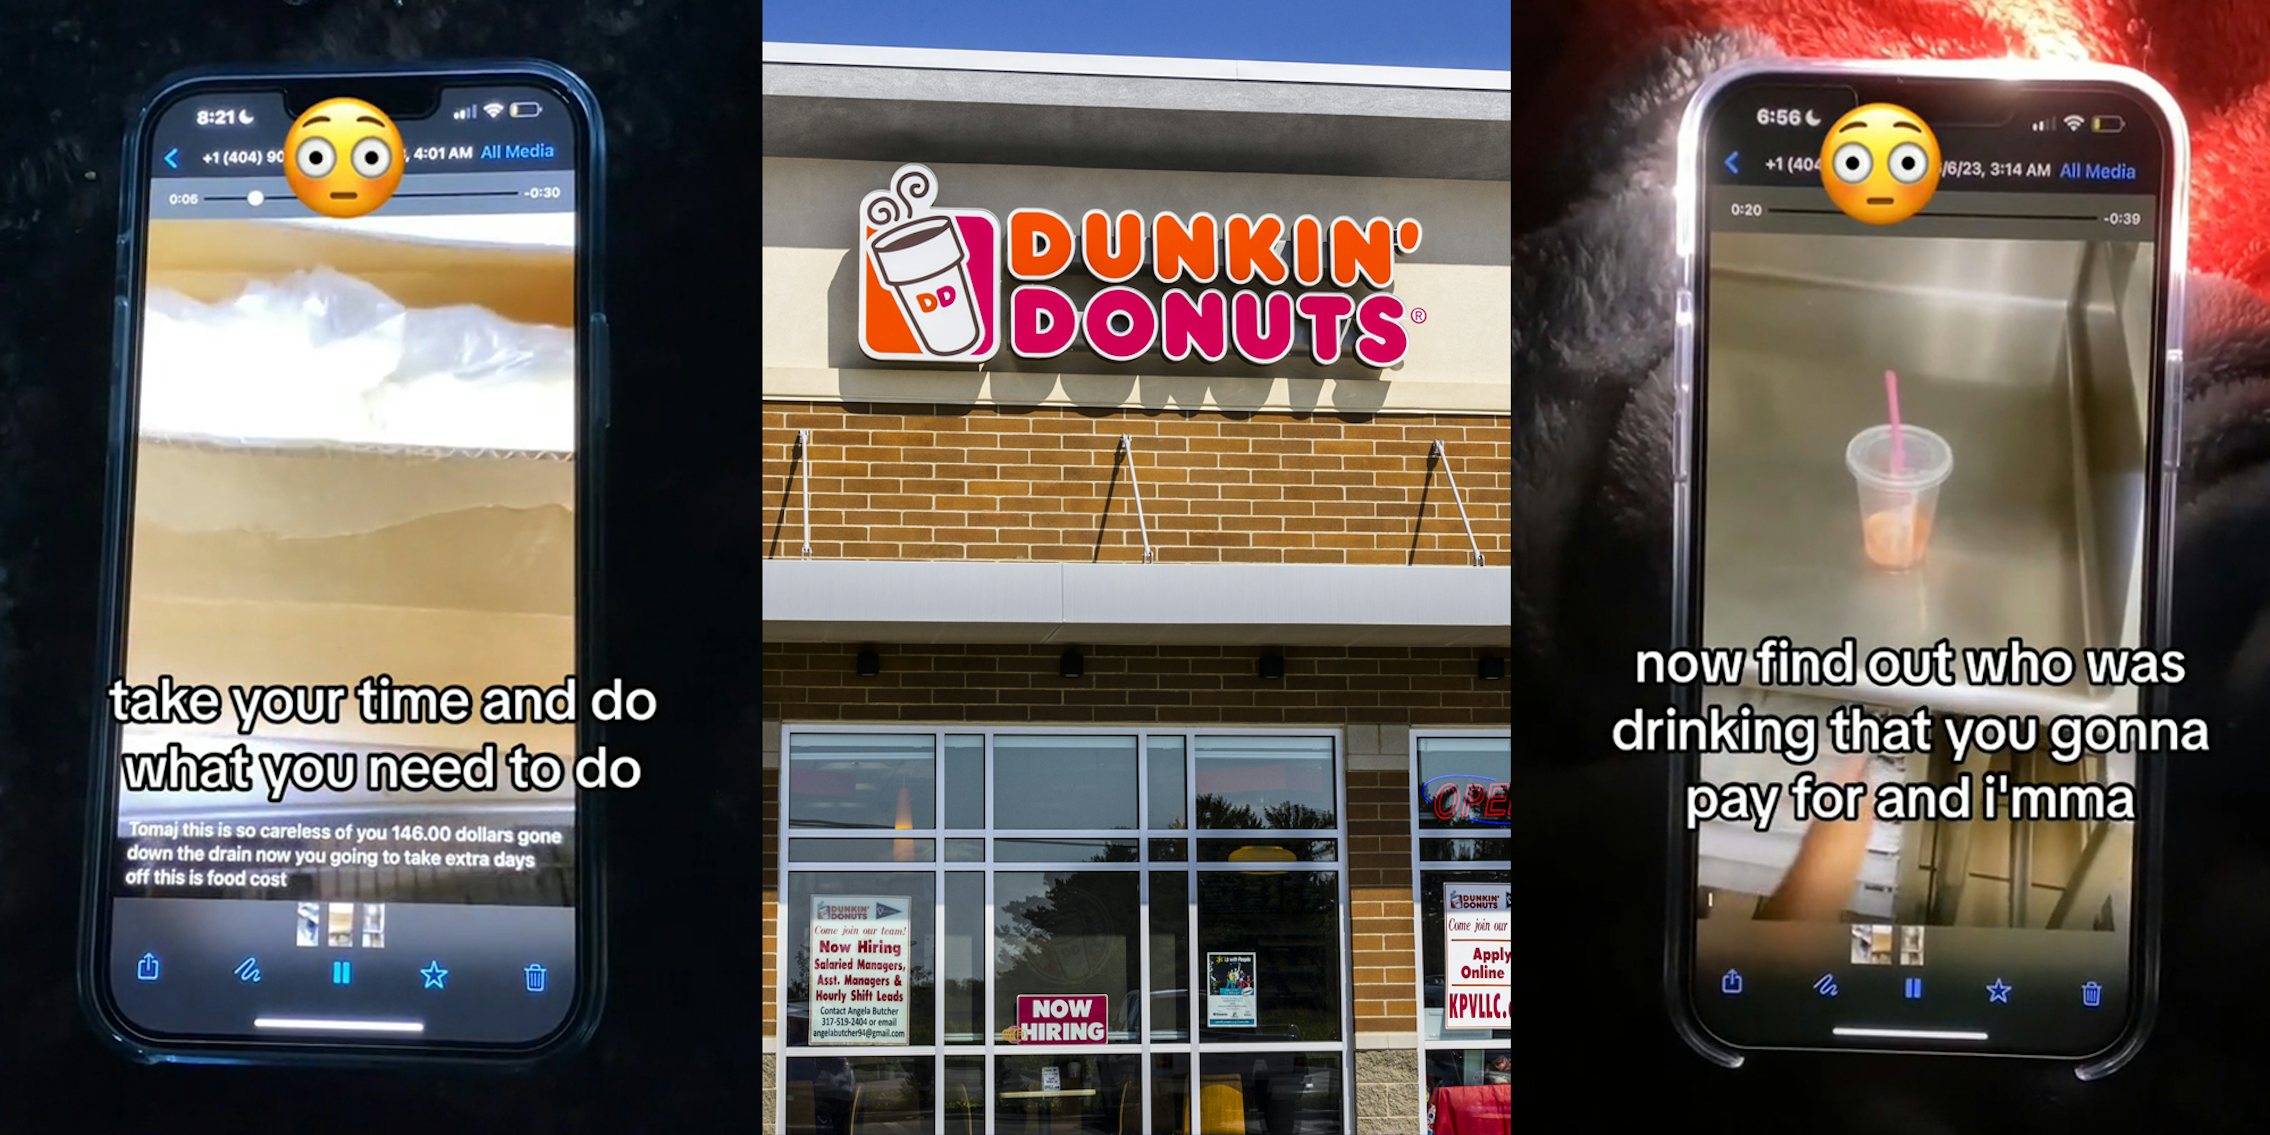 video of Dunkin' manager speaking on phone with caption 'take your time and do what you need to do' (l) Dunkin' Donut's building with sign (c) video of Dunkin' manager speaking on phone with caption 'now find out who was drinking that you gonna pay for it and i'mma' (r)